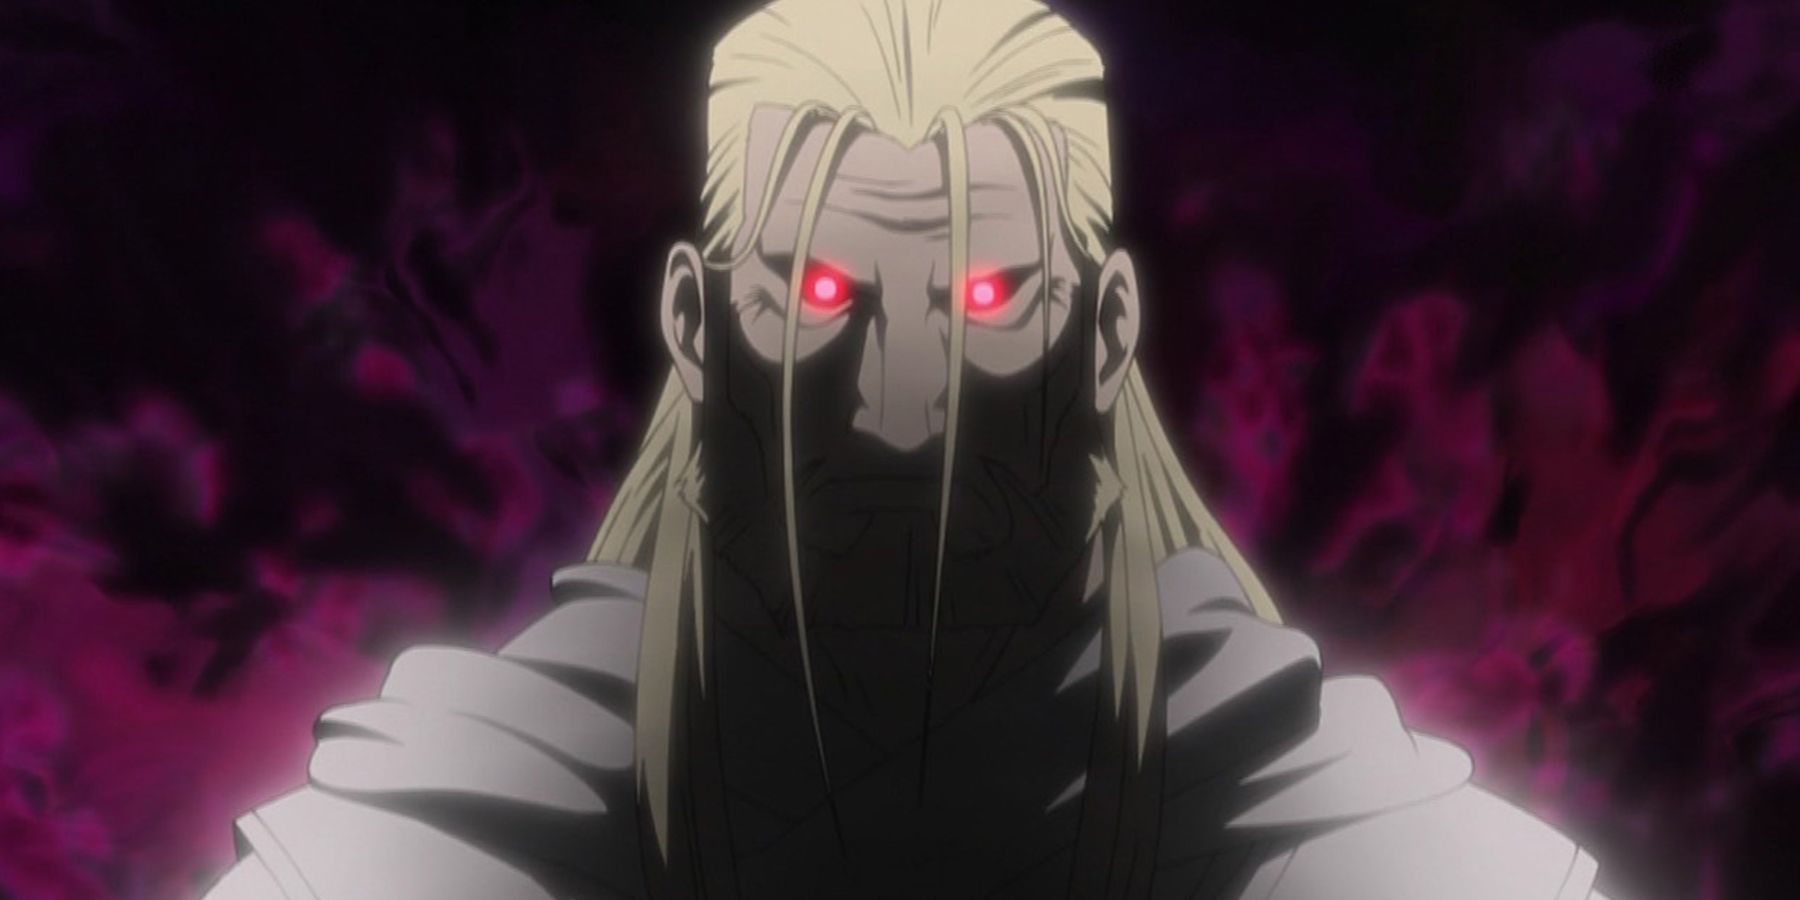 Father from Fullmetal Alchemist: Brotherhood with his face in shadow and eyes glowing red